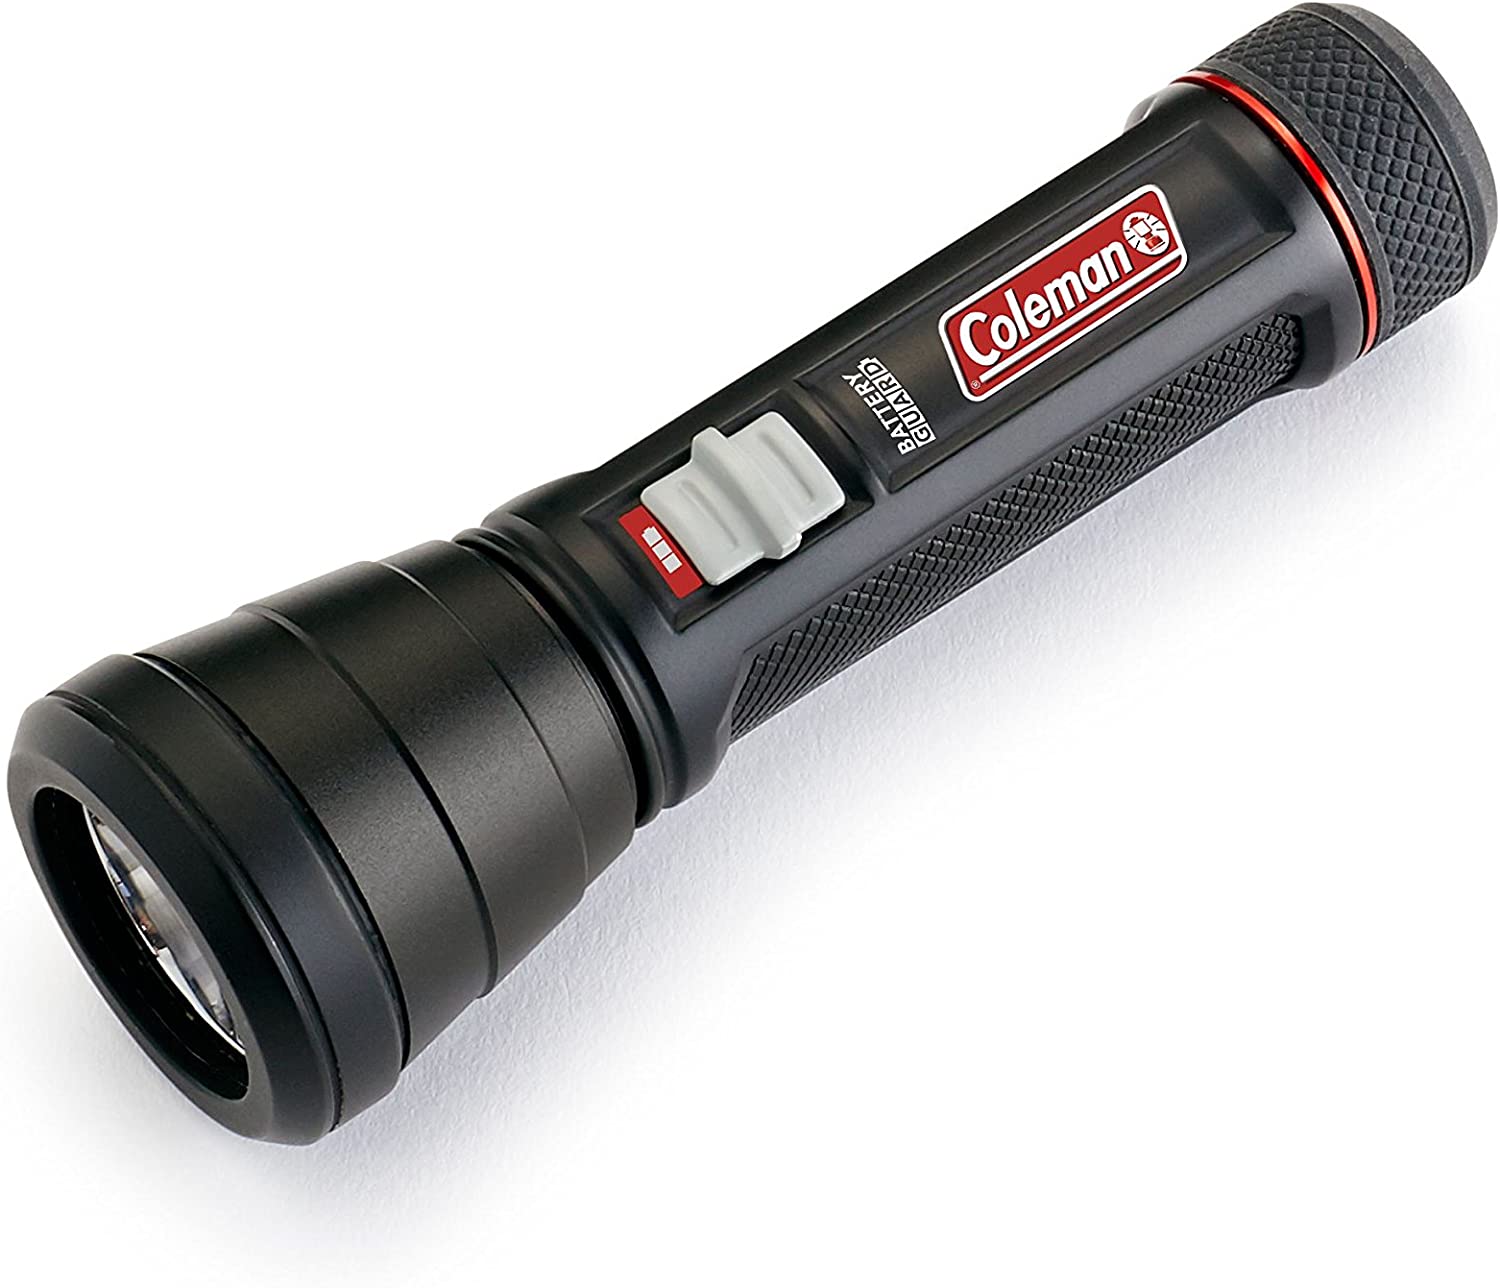 Coleman BatteryGuard 250M Flashlight $5.75 + Free Store Pickup at REI, FS for Co-Op Members or FS on $50+